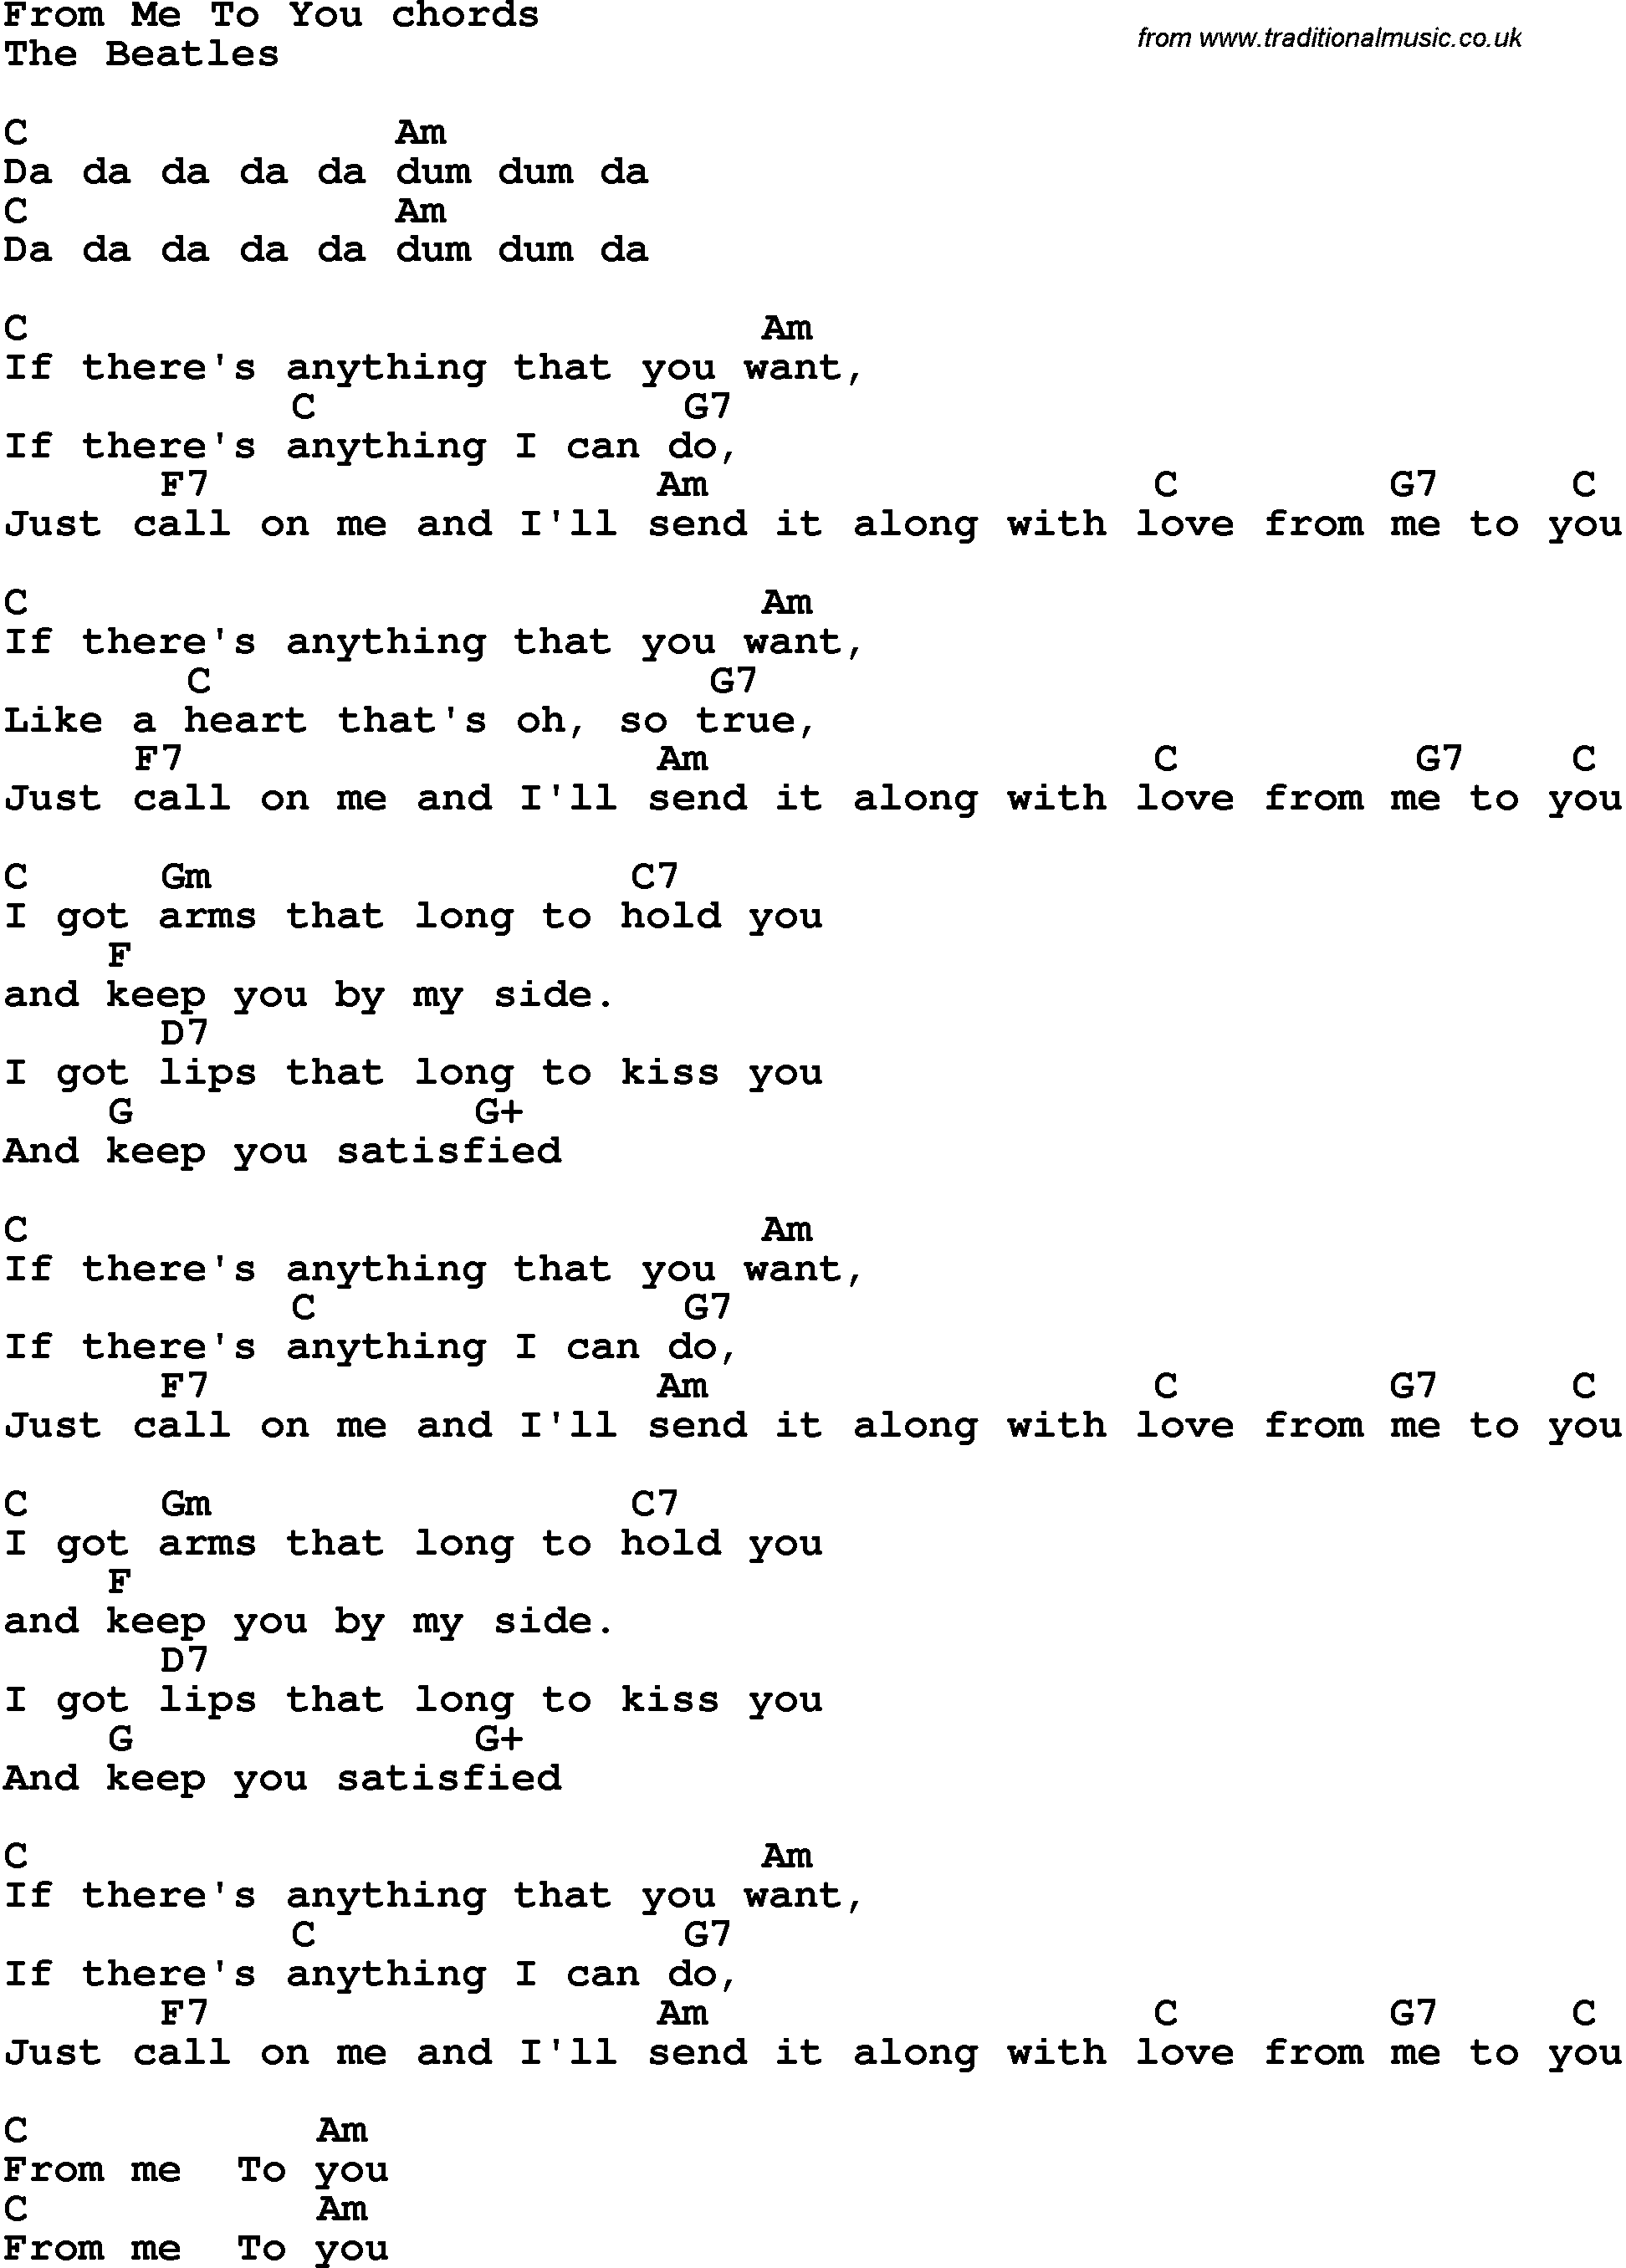 Song Lyrics with guitar chords for From Me To You - The Beatles